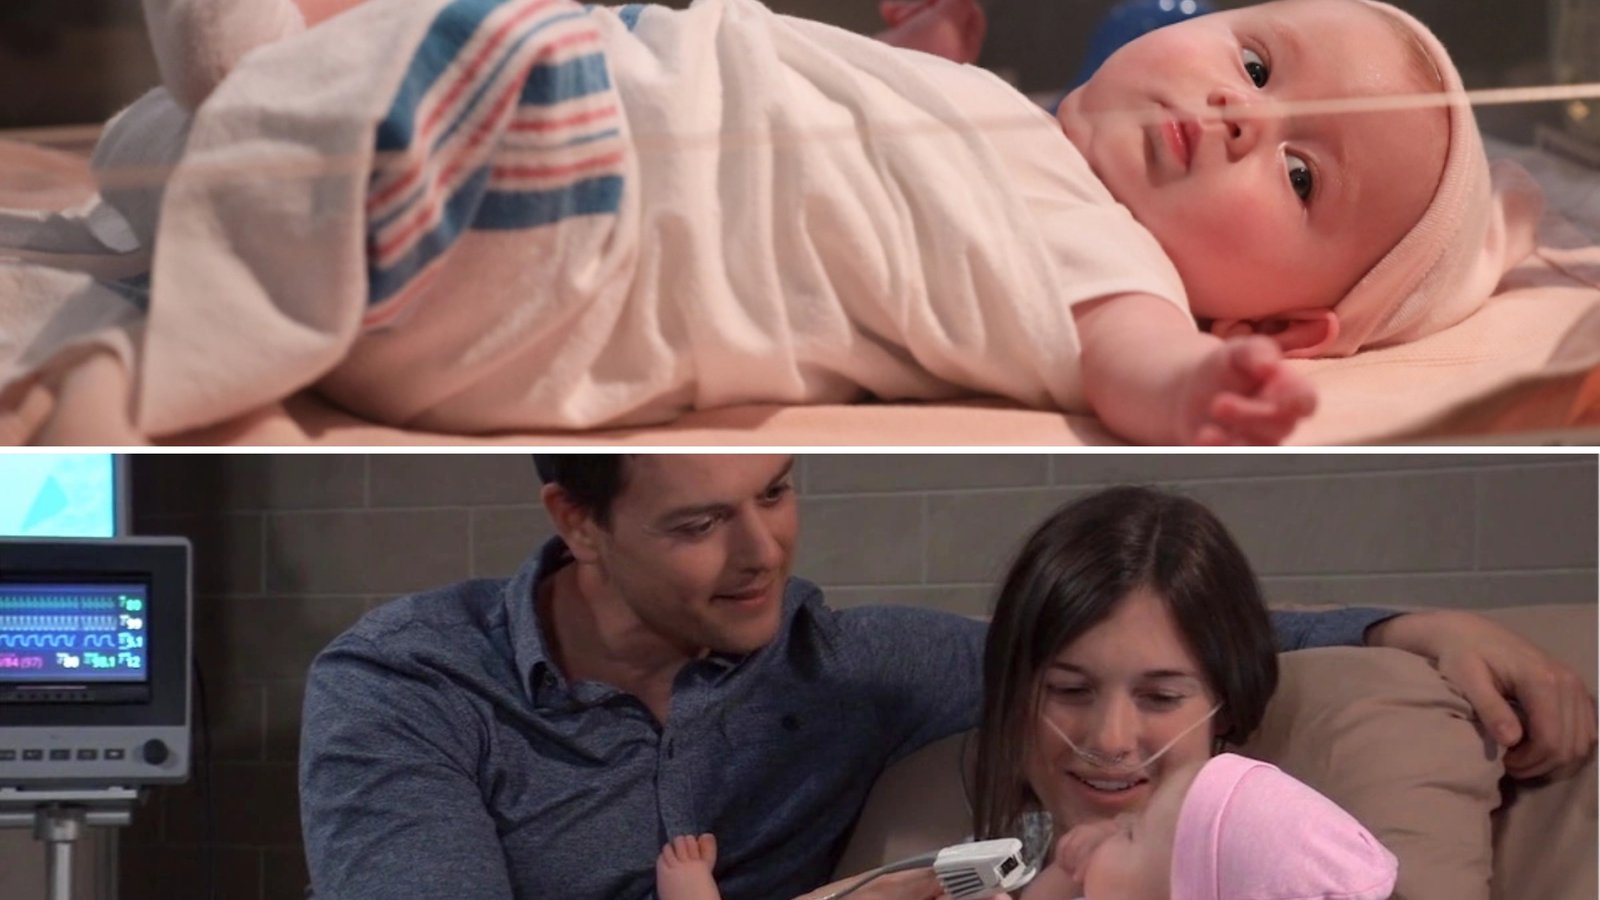 GENERAL HOSPITAL Introduces Baby Amelia, Played by Twin Boys